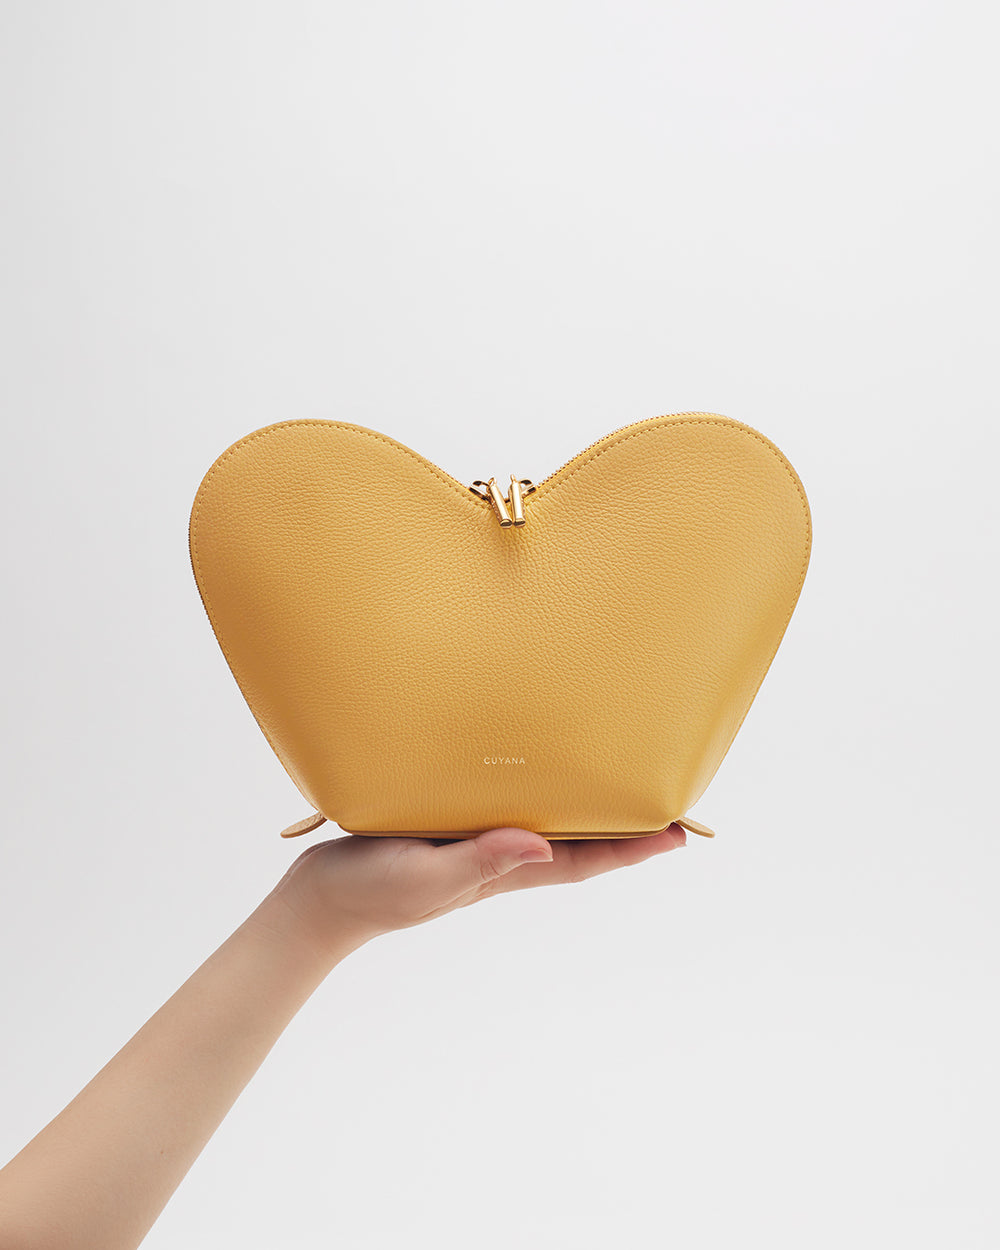 Hand holding a heart-shaped pouch.